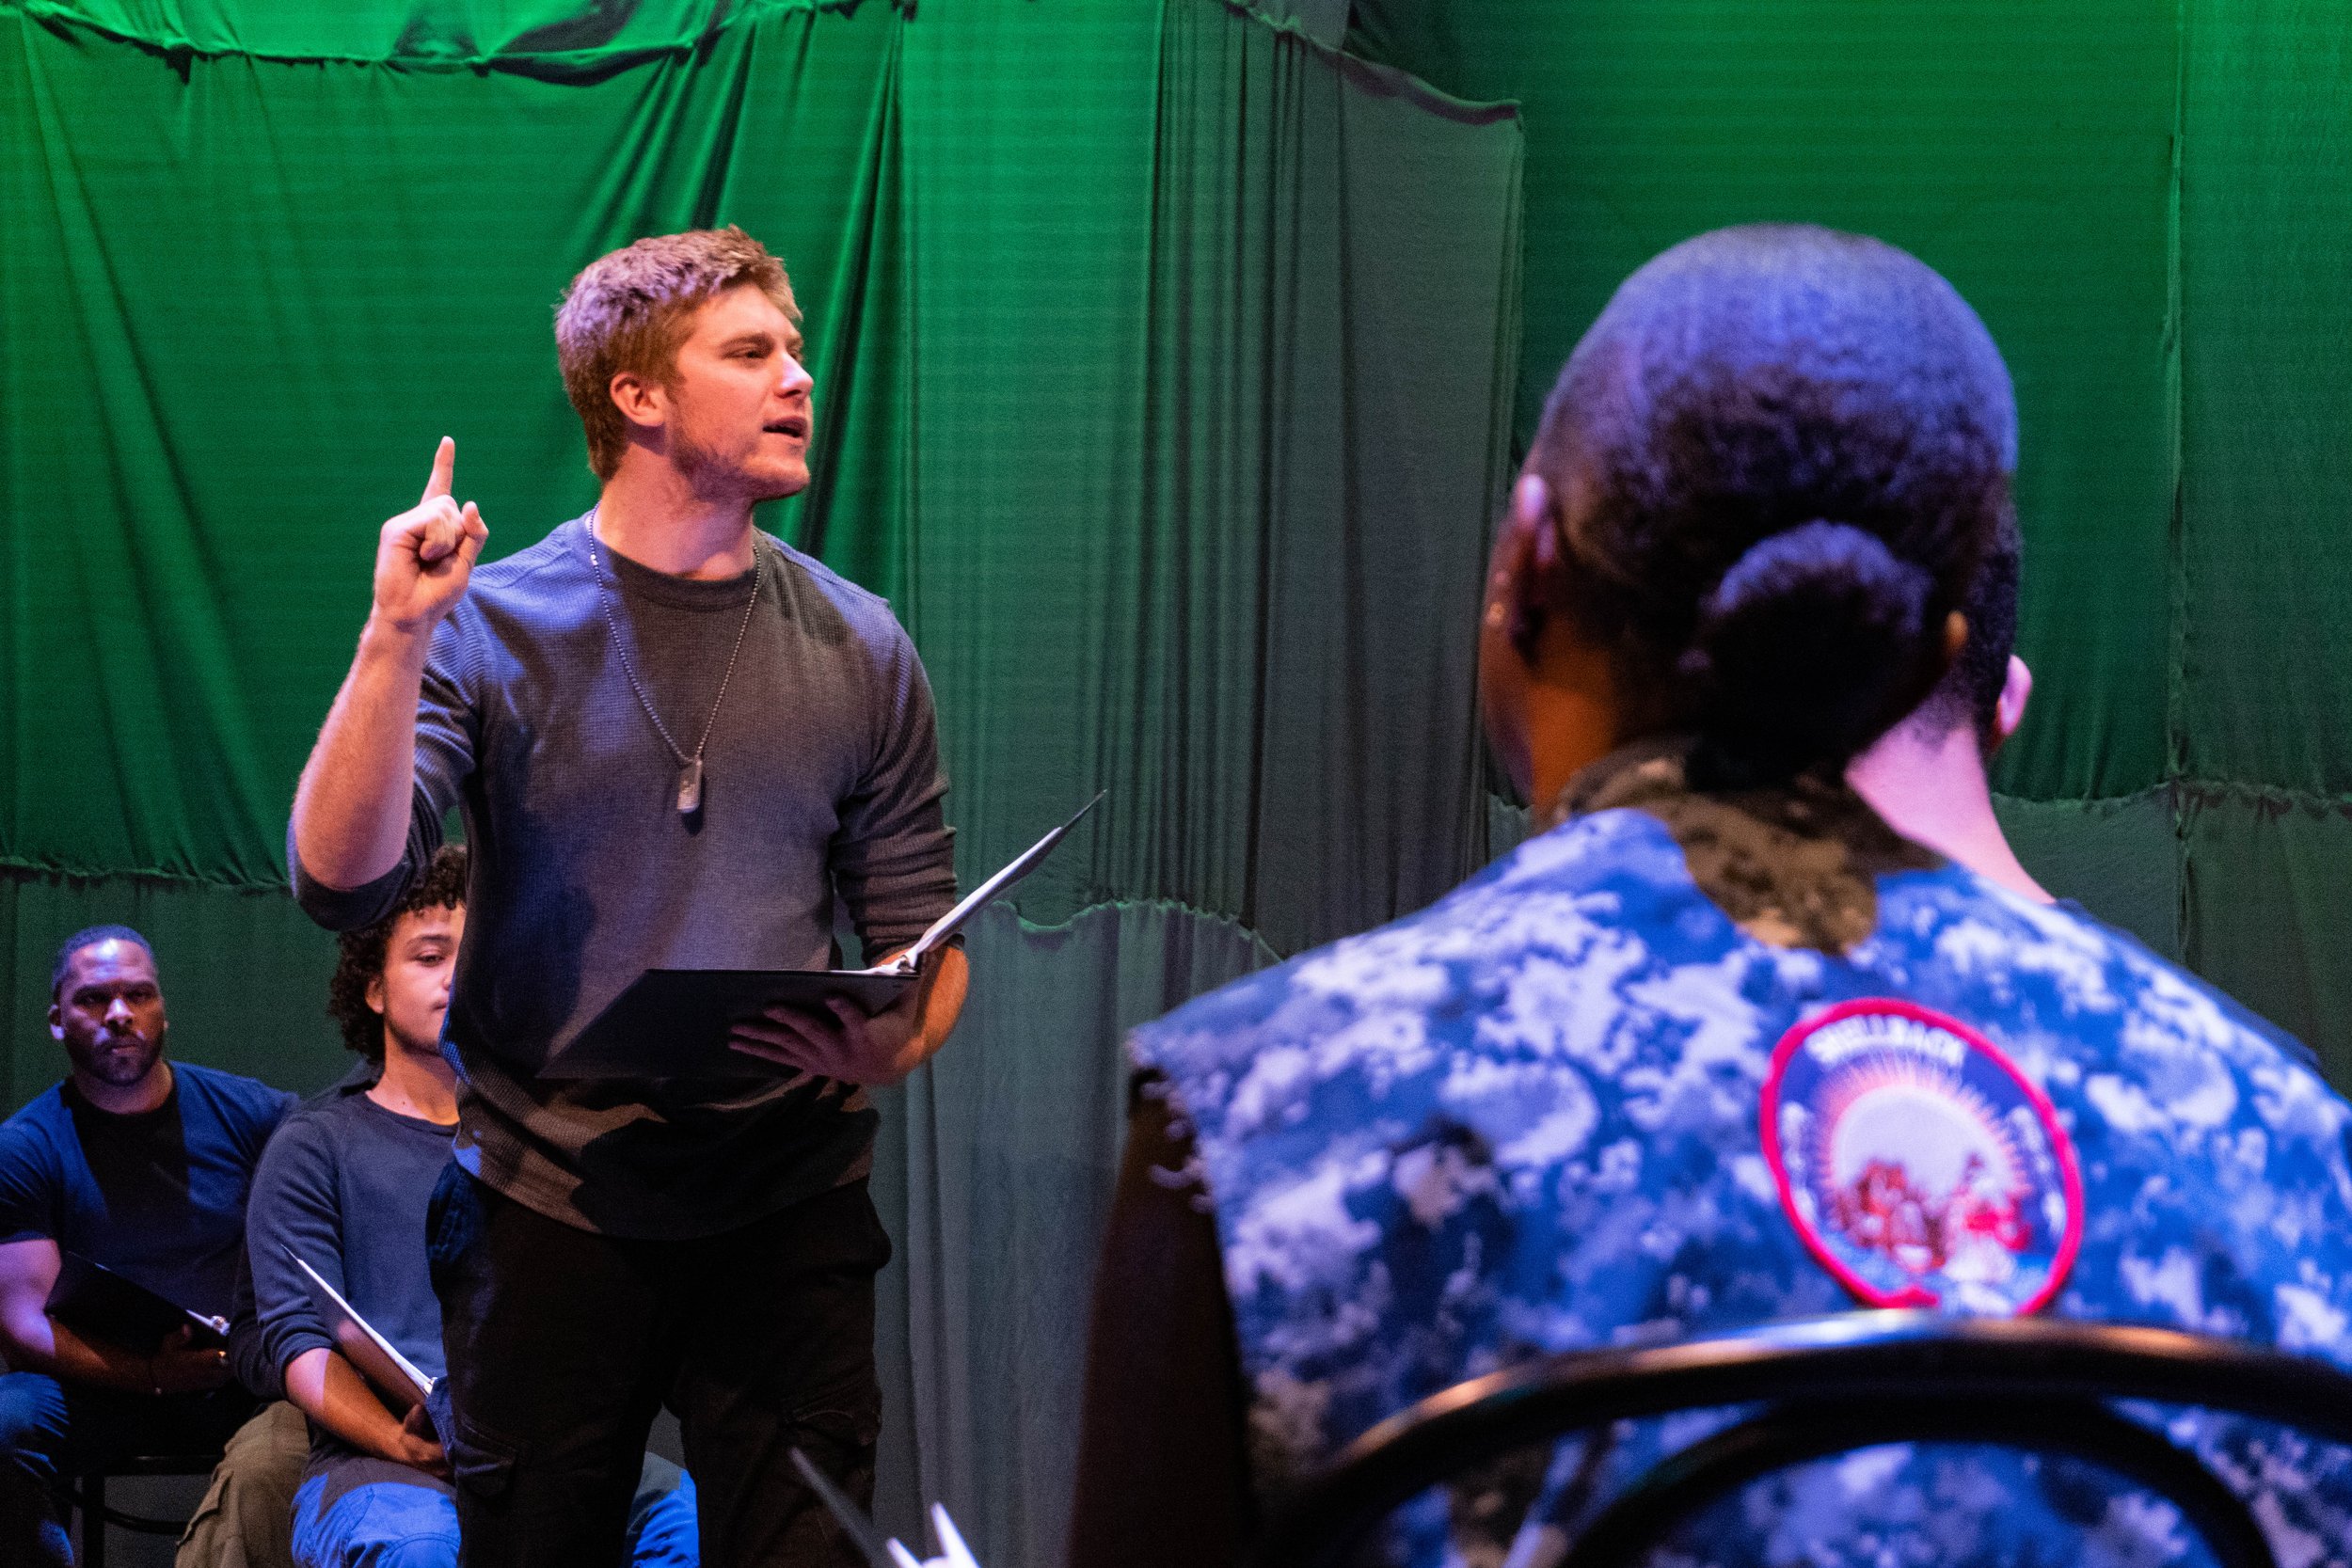  Justin Valine plays Chase a veteran in War Words as Jomarla Melancon watches. War Words is a play written by Michelle Kholos Brooks and is part of a national initiative to honor veterans through theatrical storytelling. The play was in collaboration